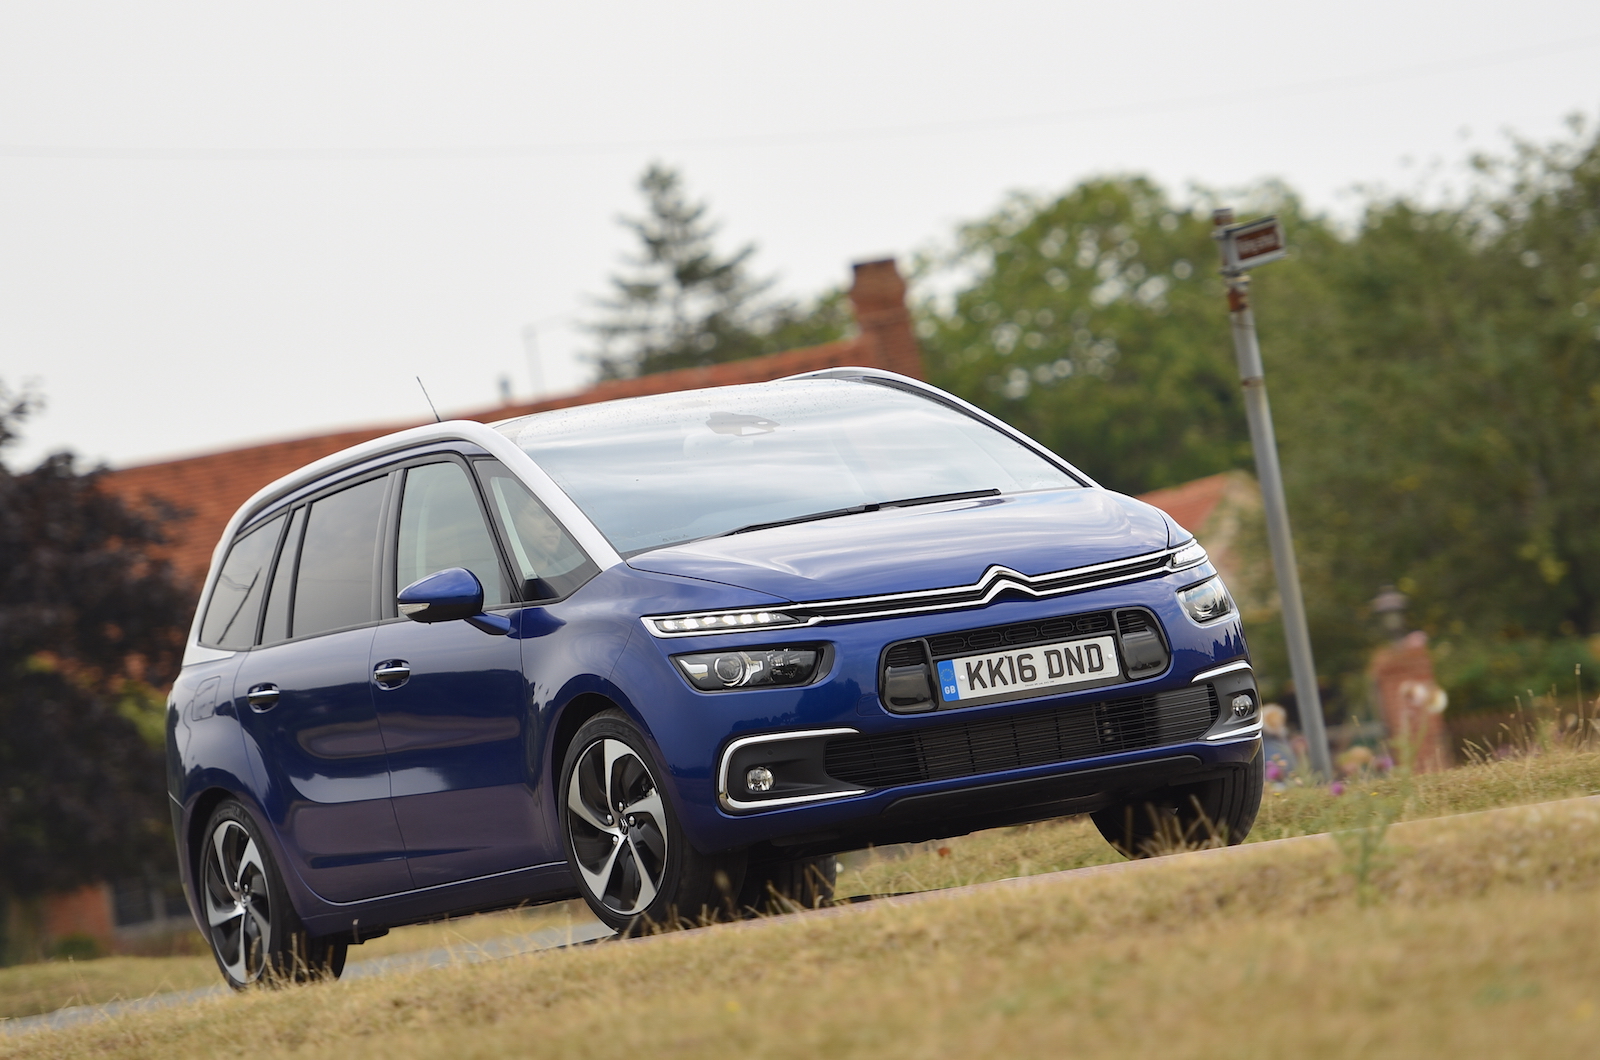 2016 Citroën Grand C4 Picasso first drive